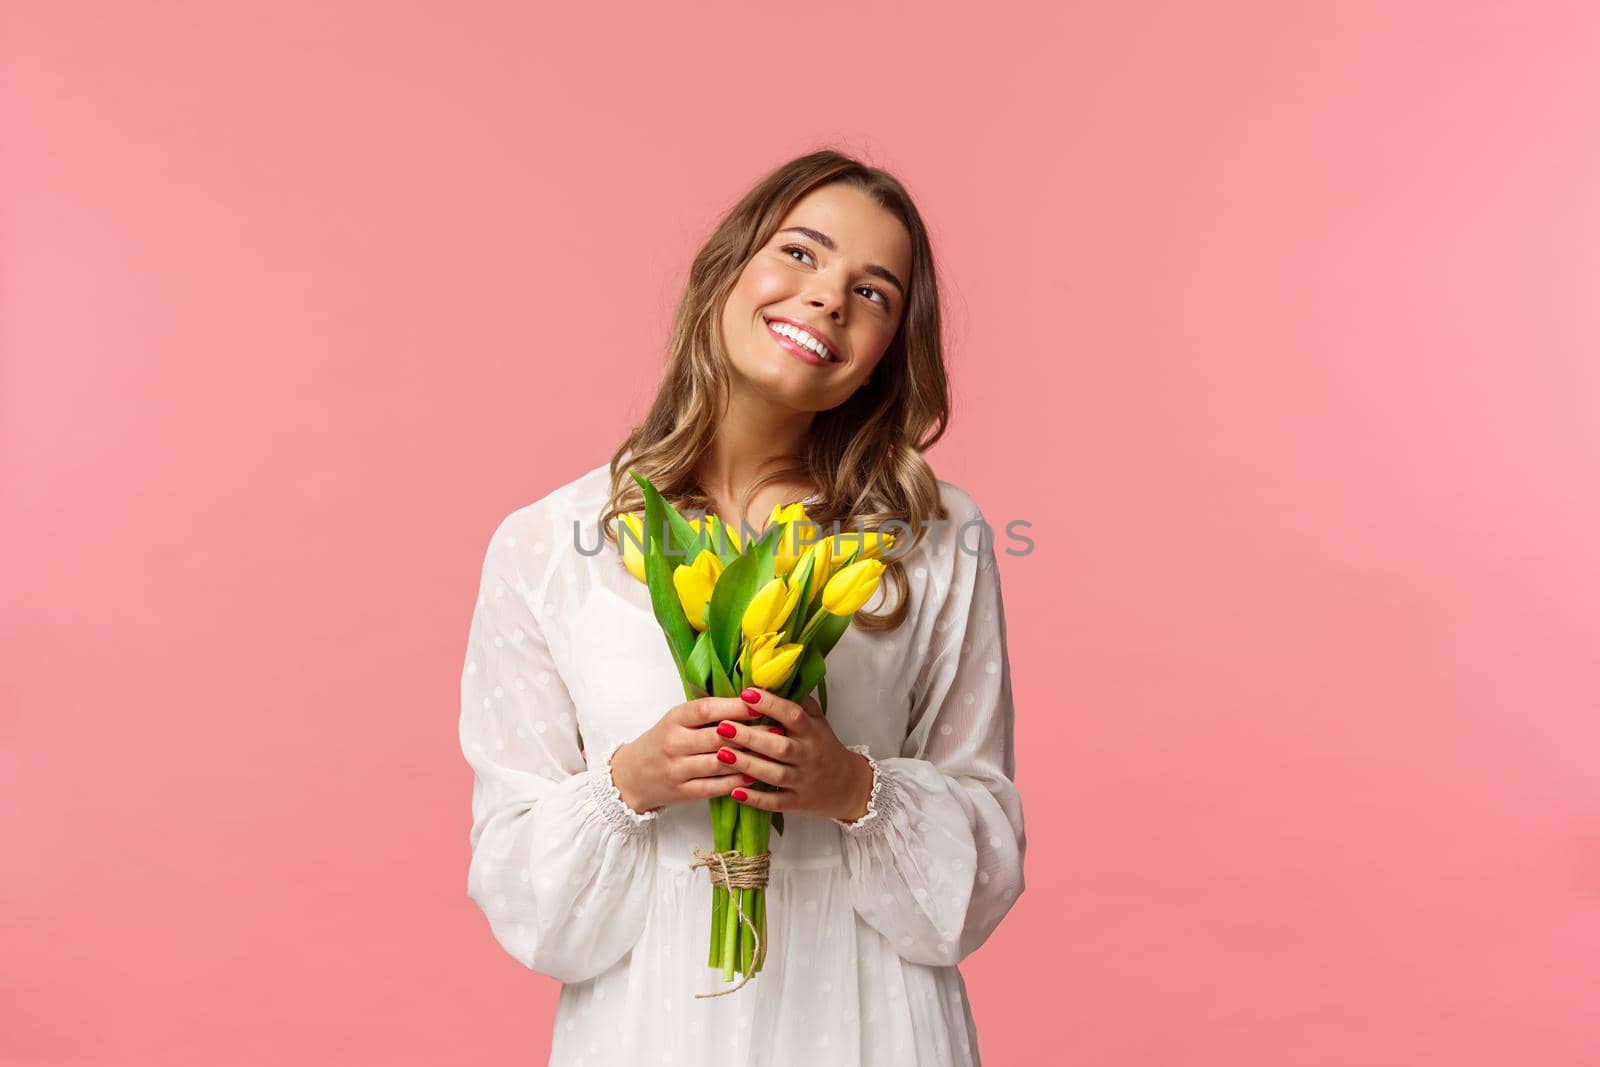 Holidays, beauty and spring concept. Portrait of dreamy, happy blond girl feeling romantic daydreaming about her girlfriend, holding yellow tulips, wear white dress, standing pink background.